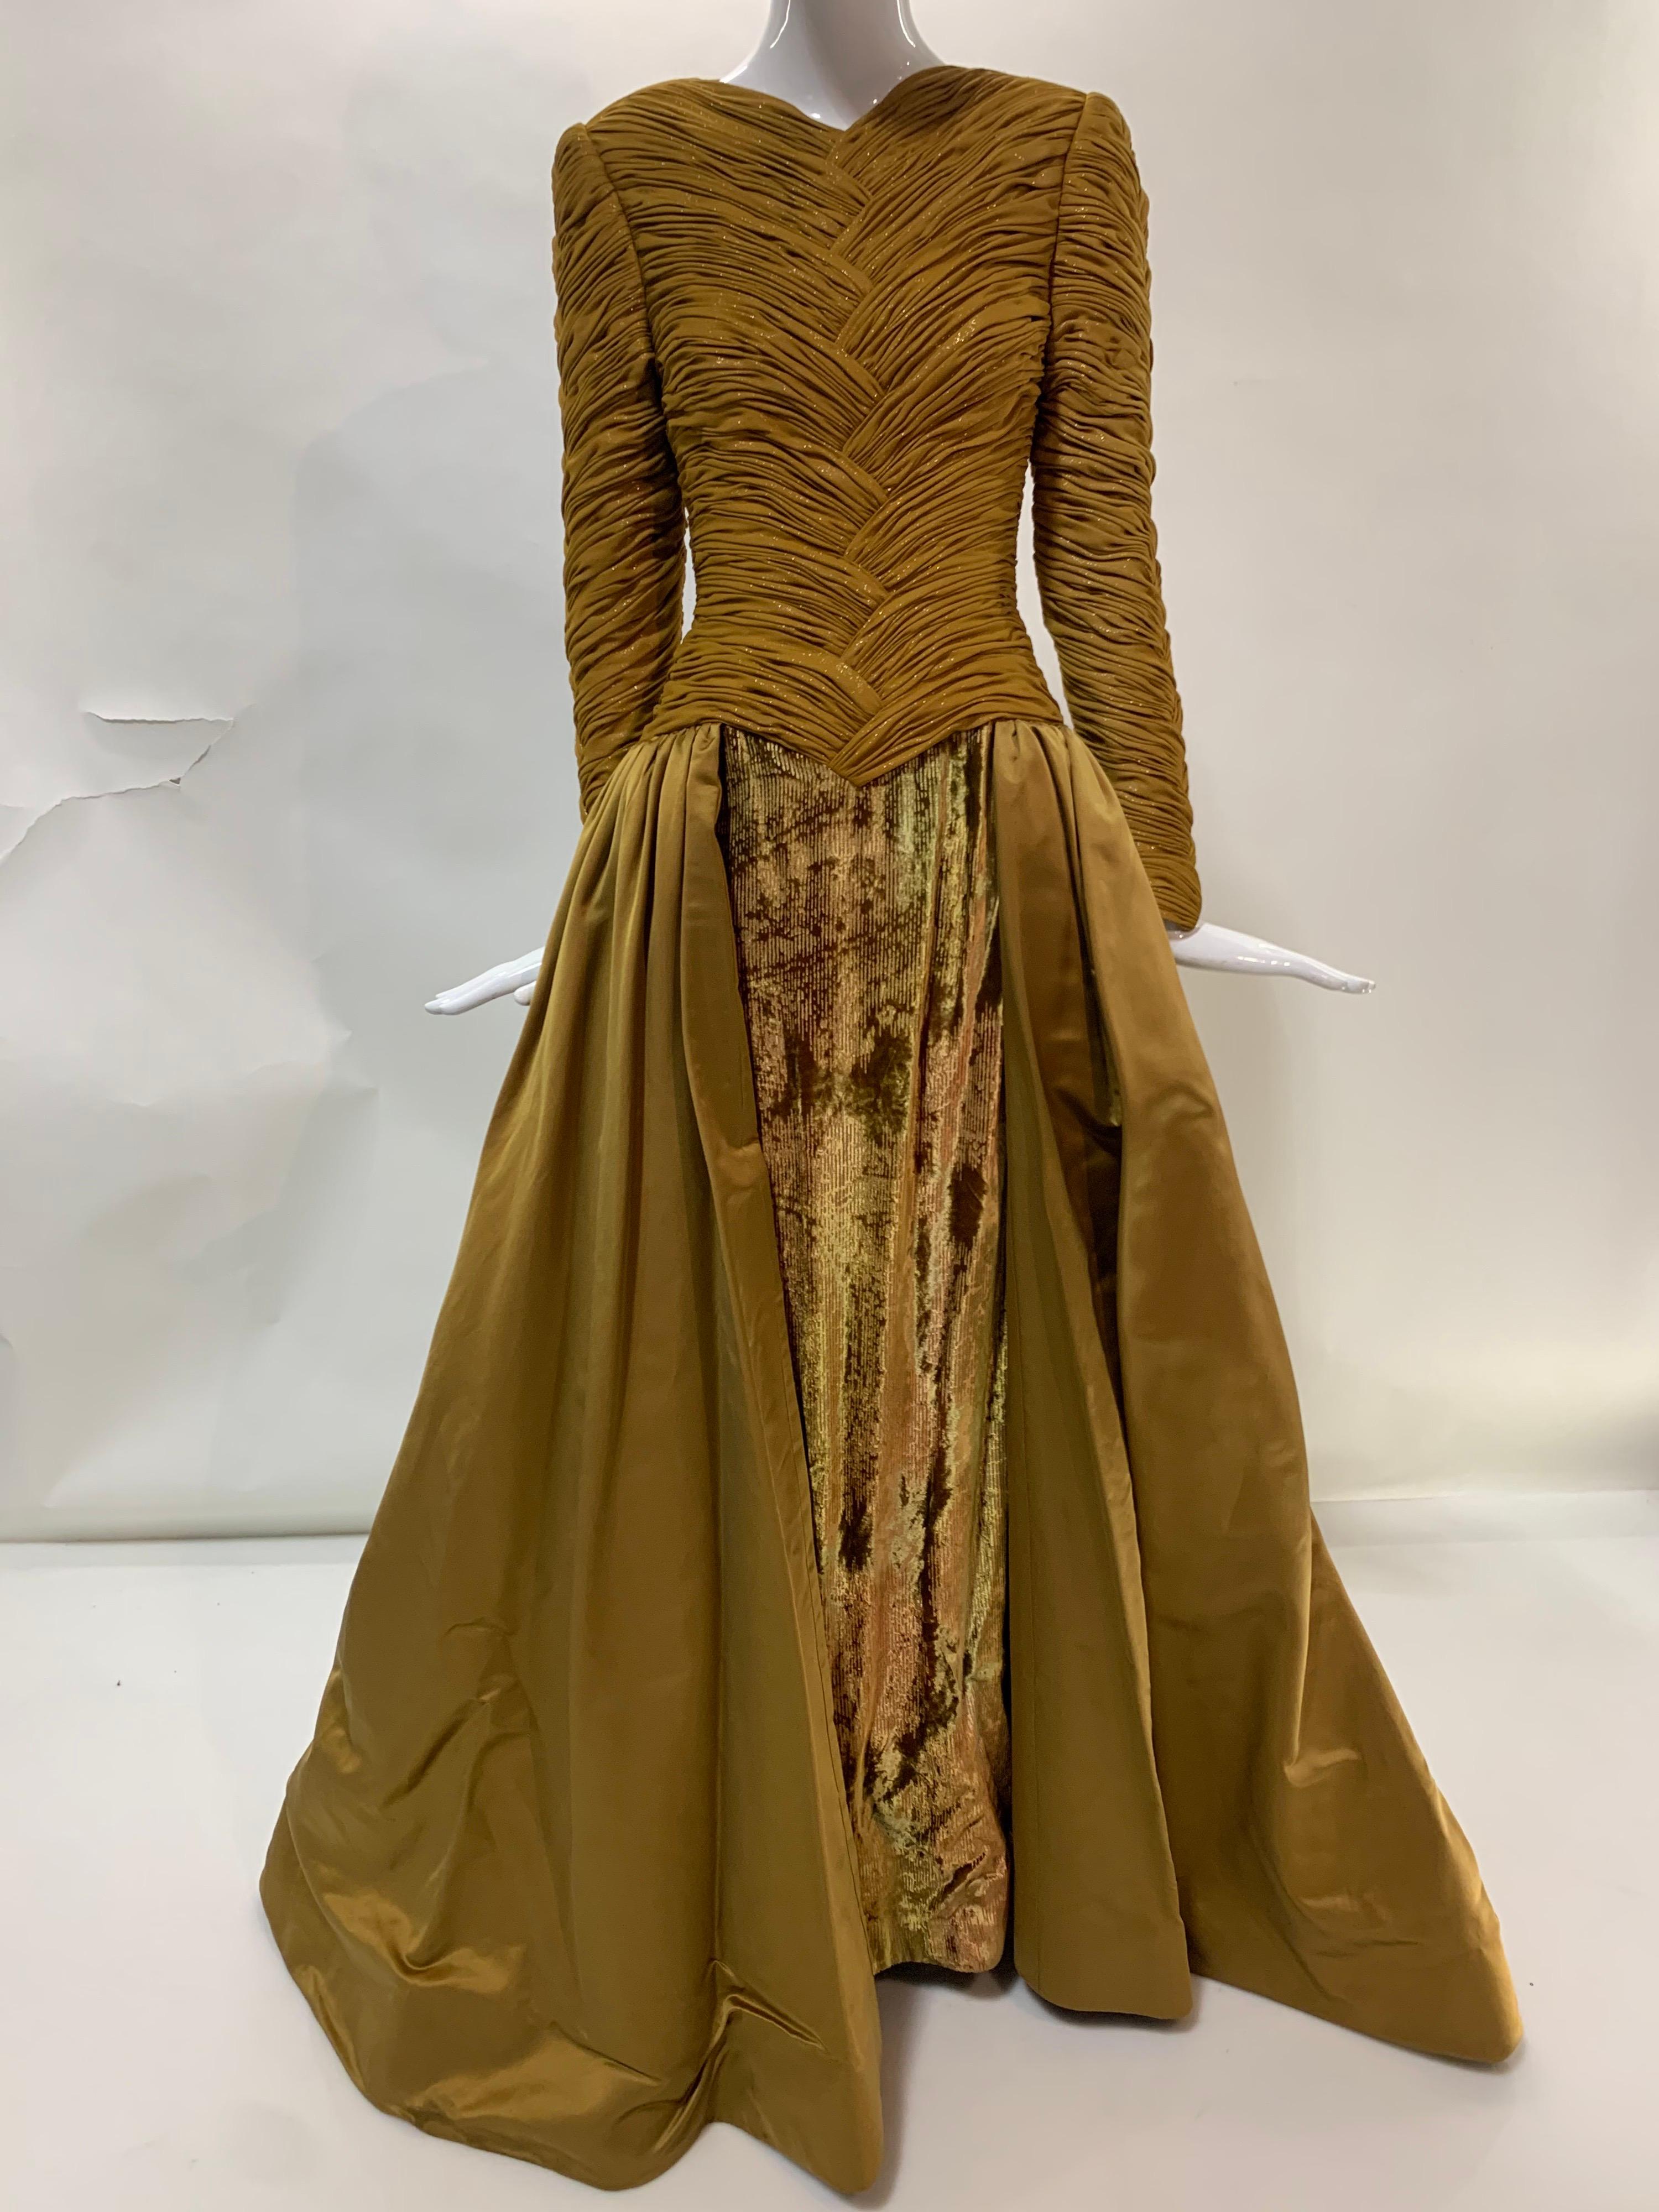 1990s Demi-Couture Gold Silk Ball Gown w/ Velvet Sheath & Dramatic Satin Skirt  For Sale 6